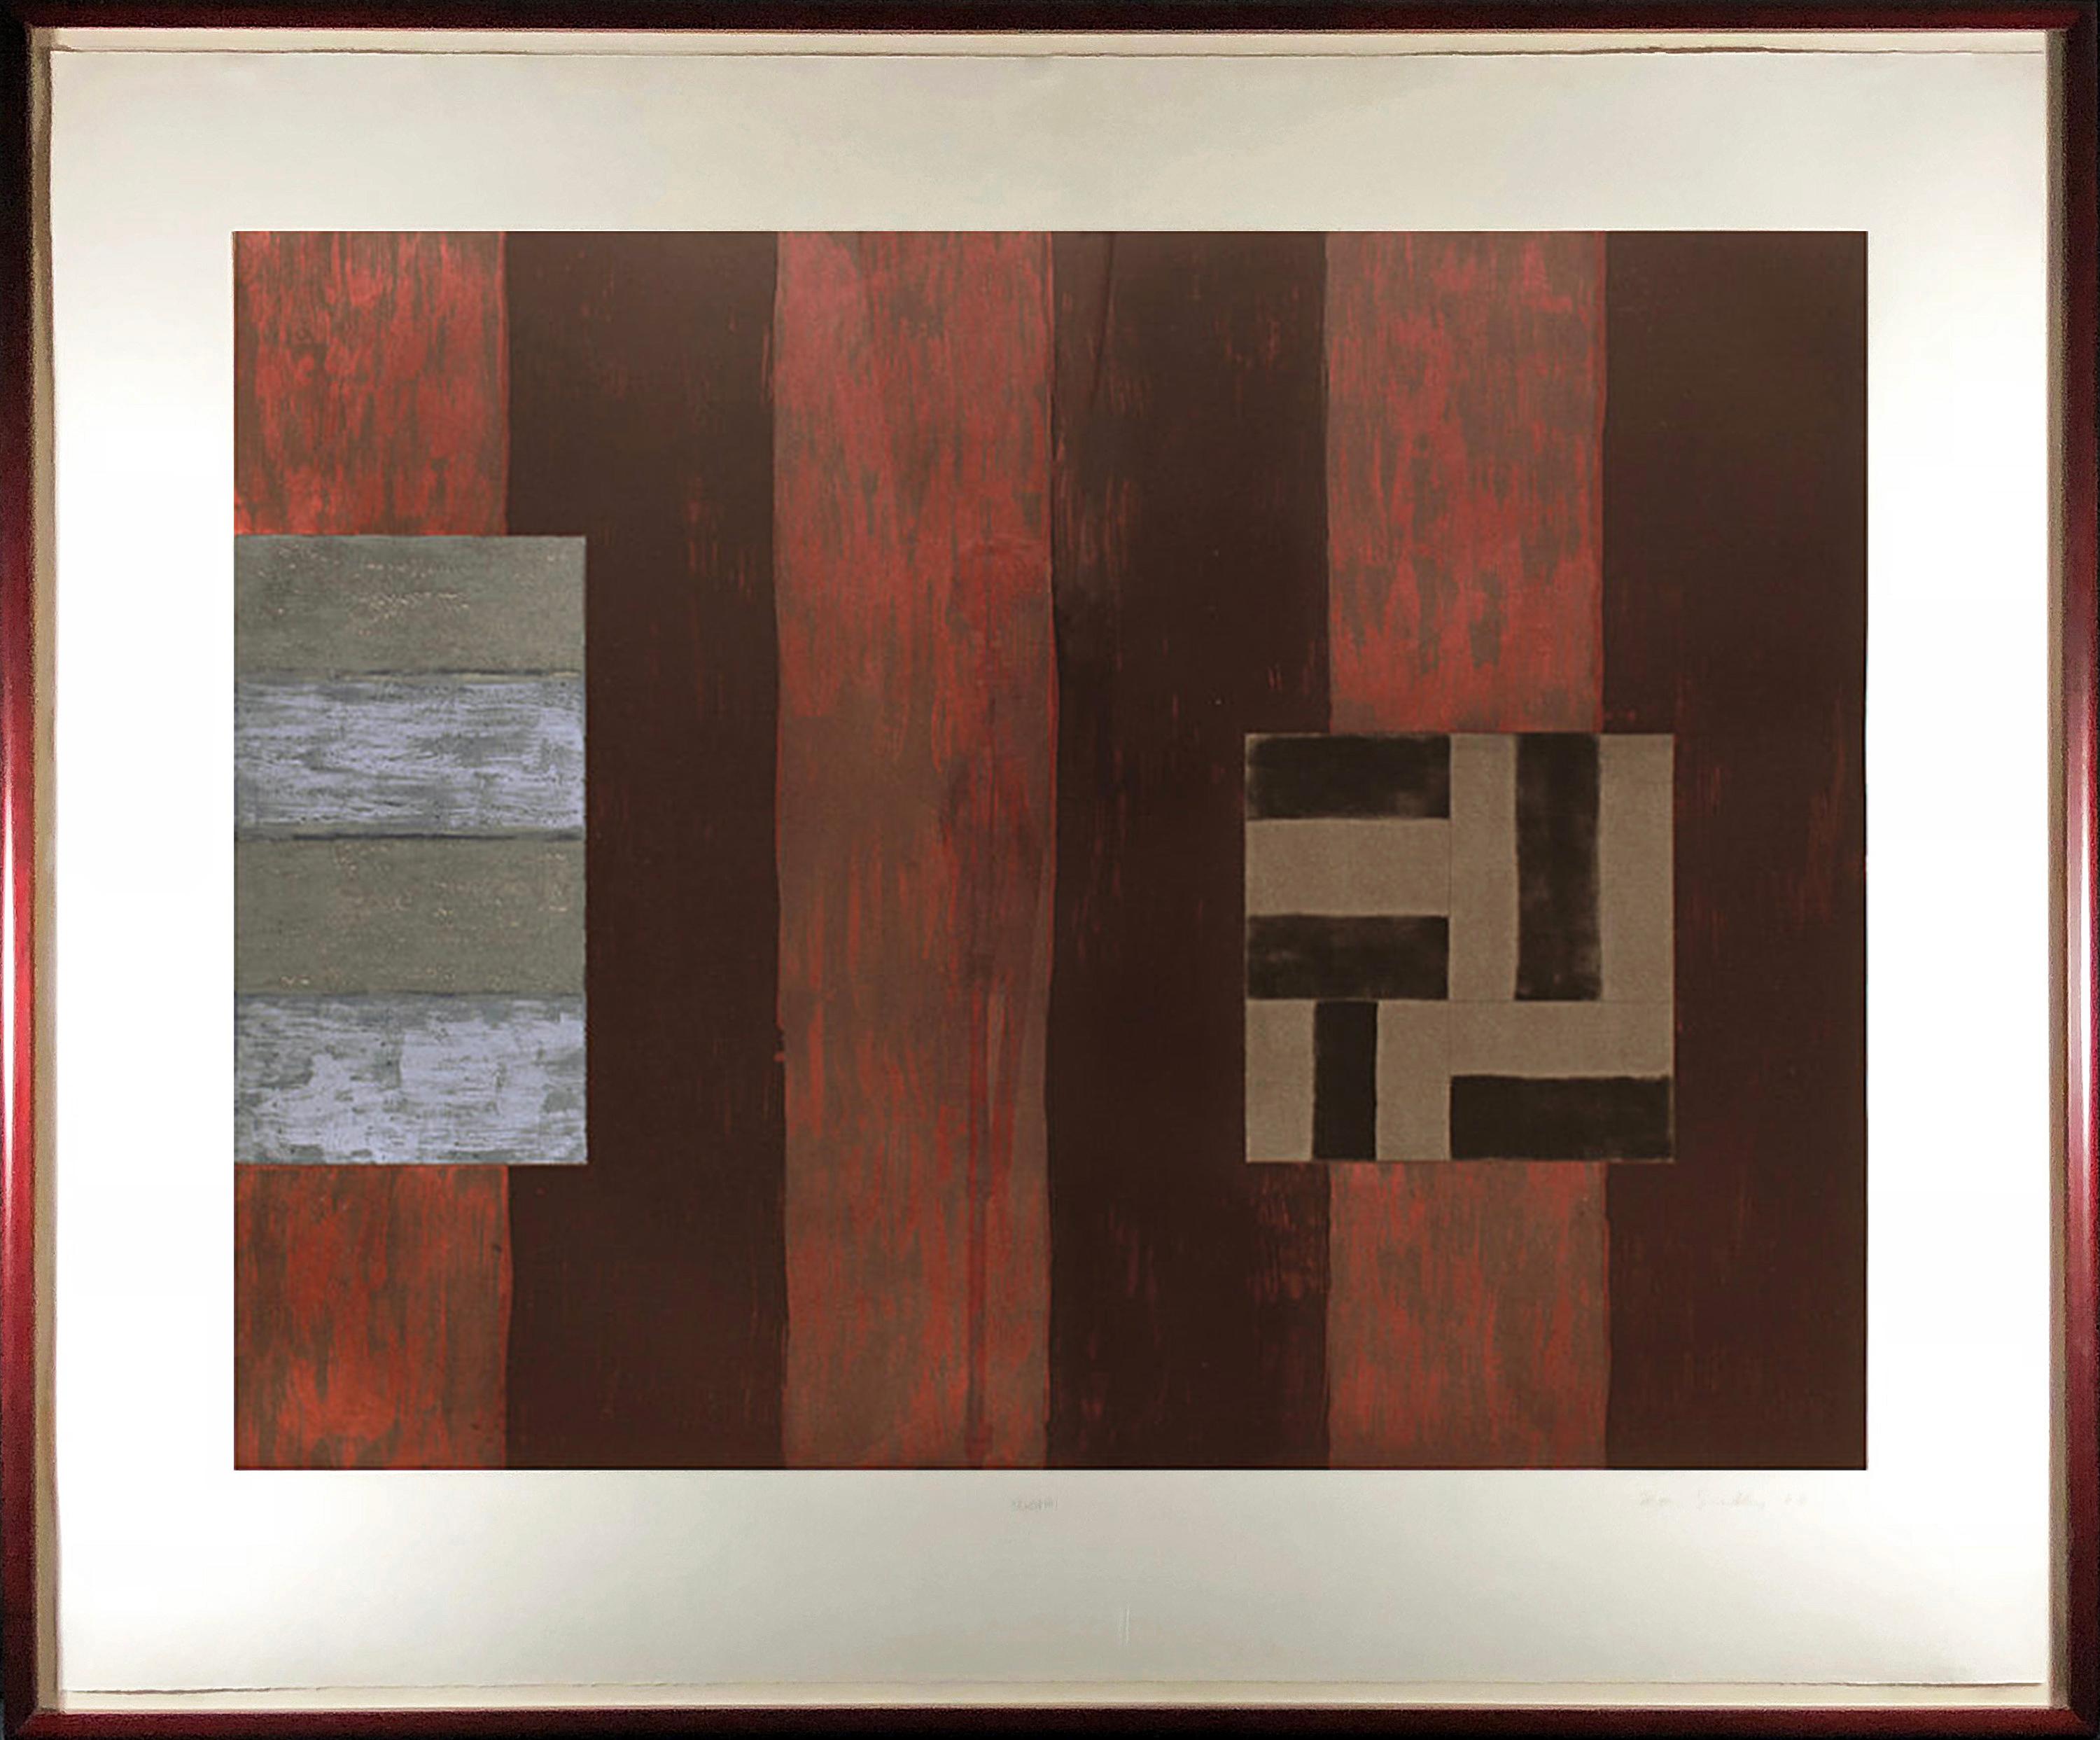 Room - Print by Sean Scully